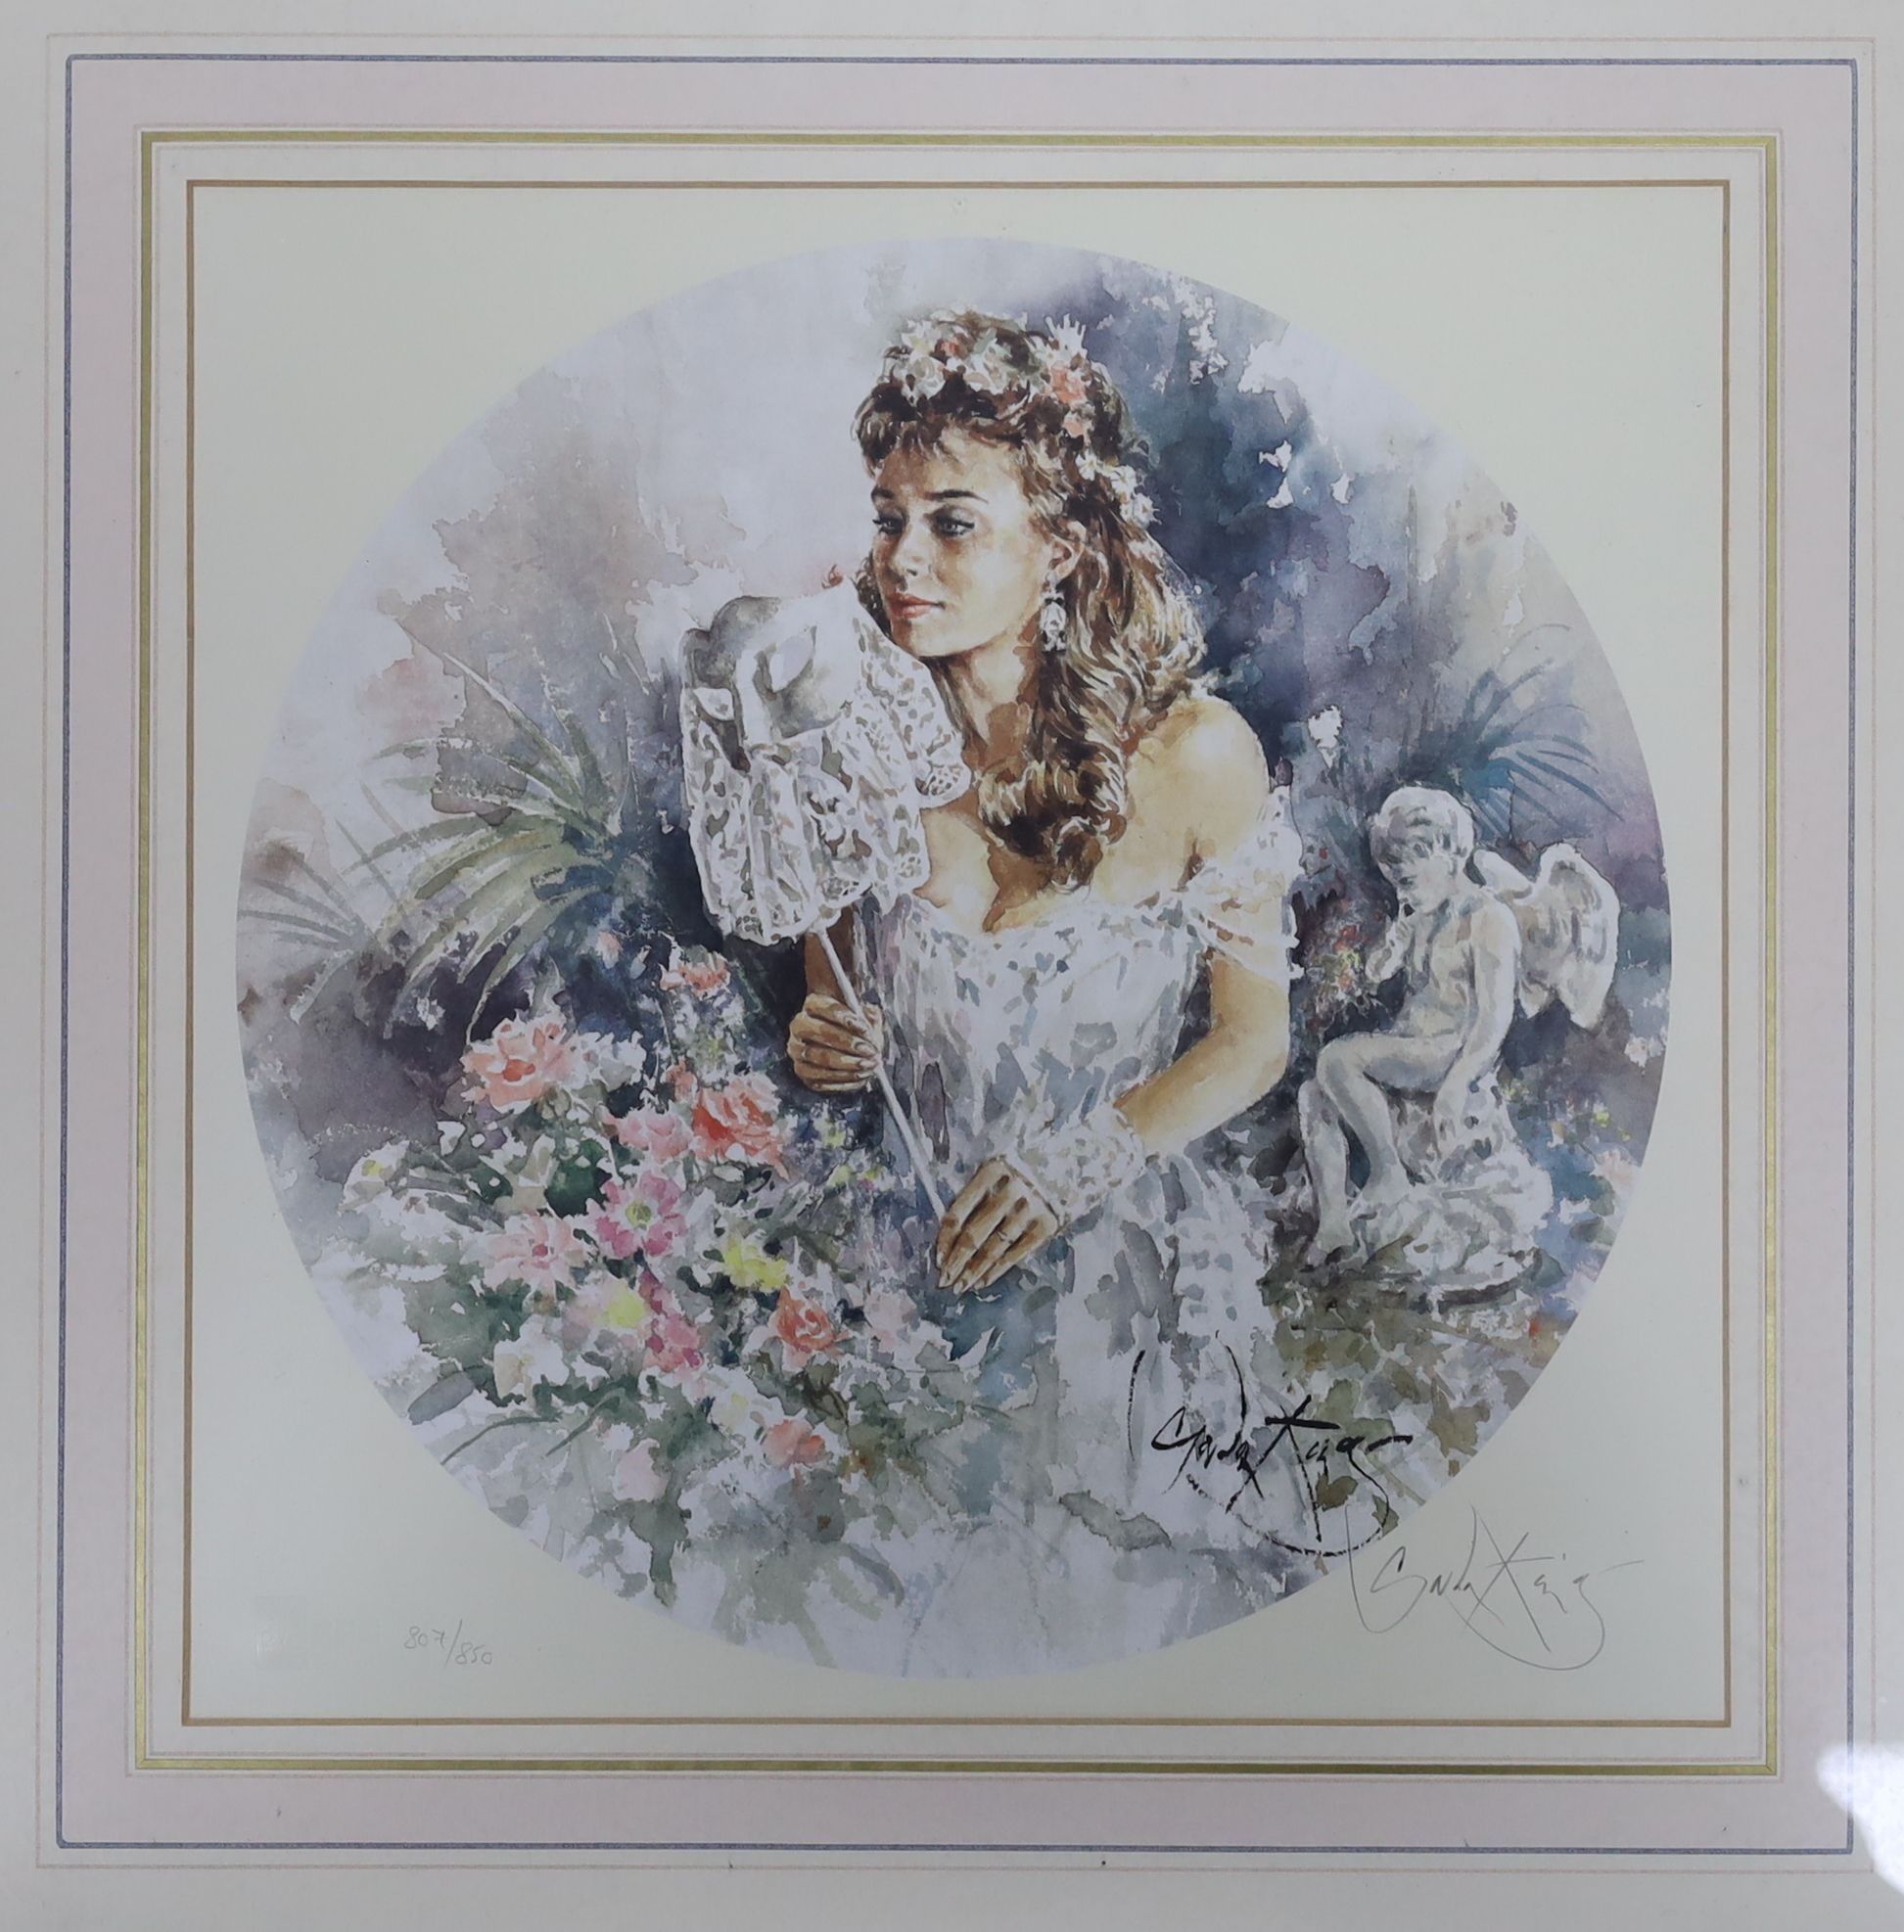 Gordon King, limited edition print, Woman with a lace parasol, signed, 807/850, 31 x 31cm.